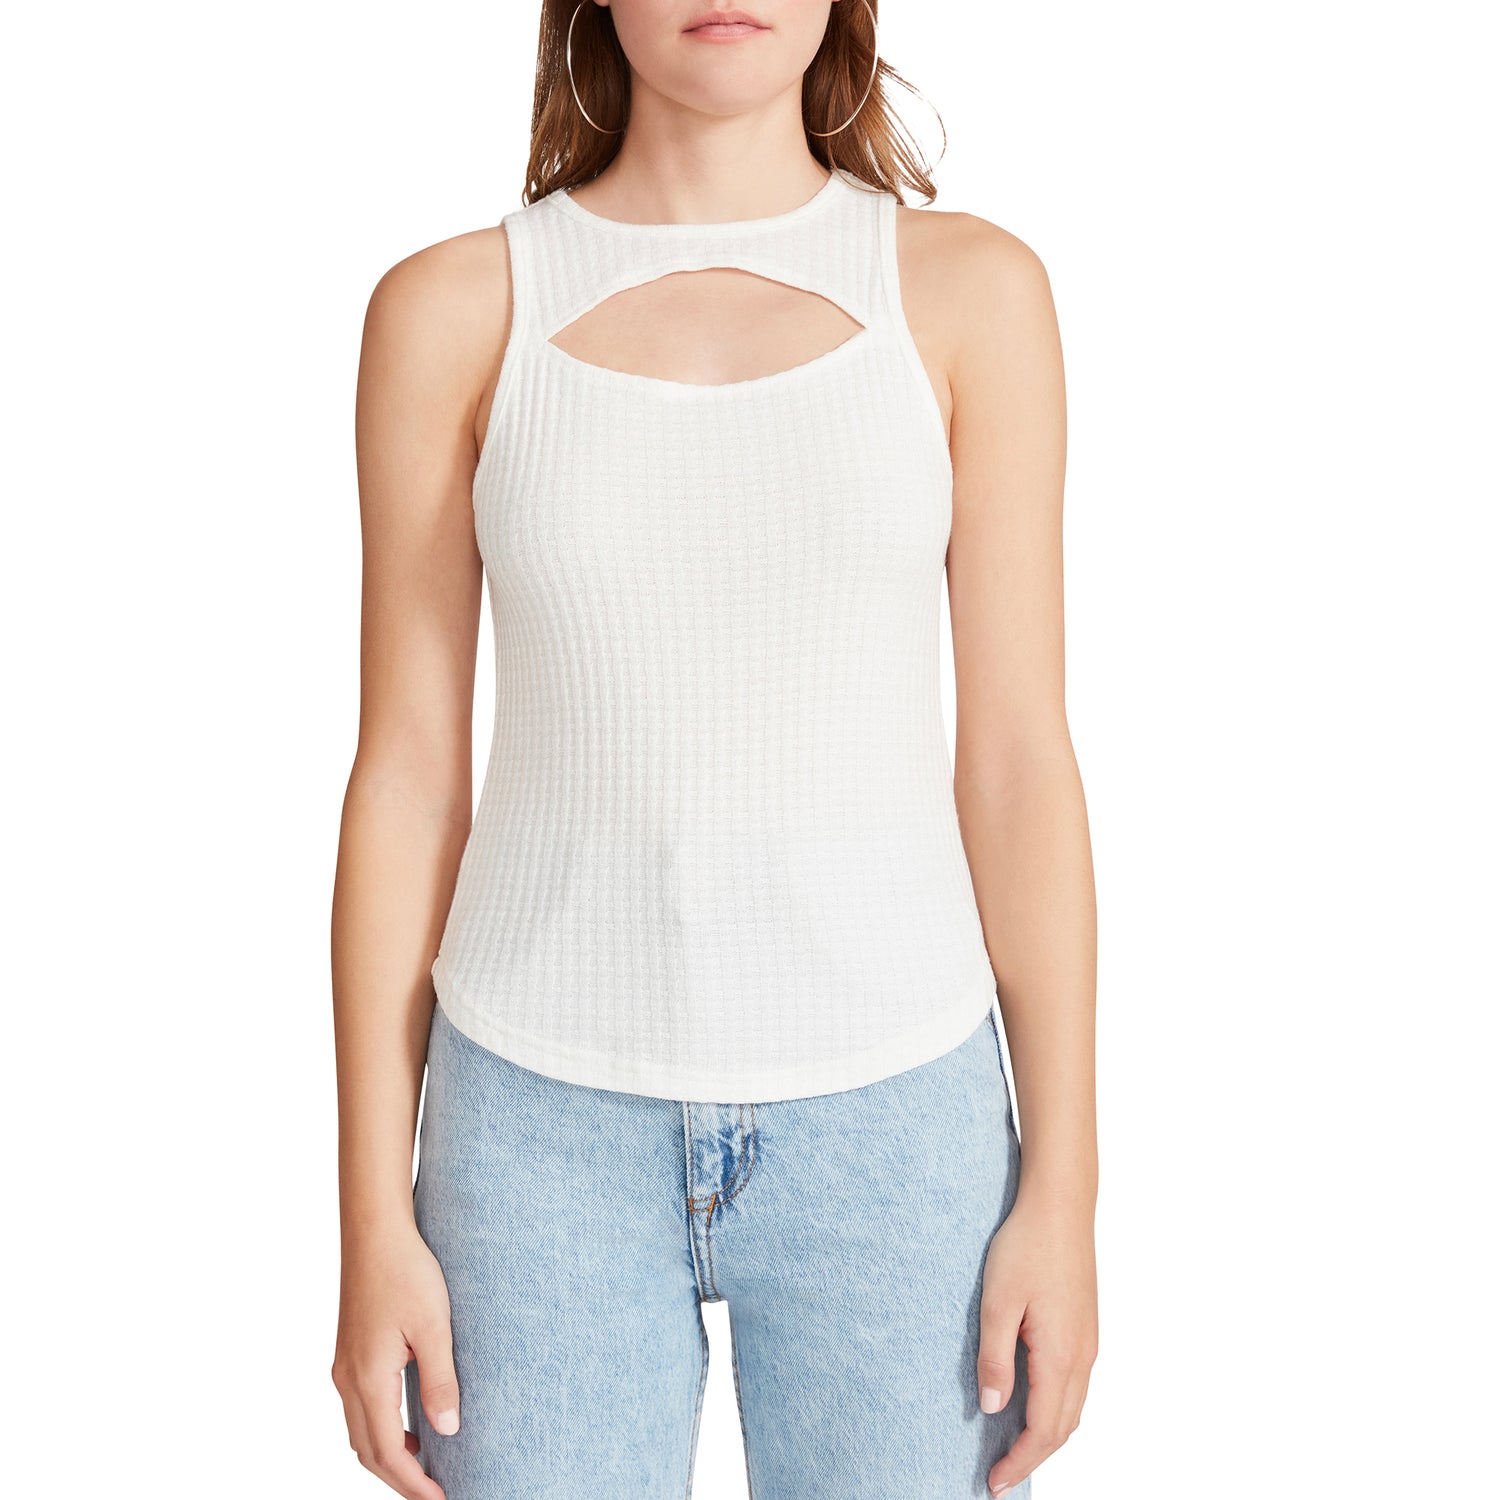 BB Dakota Sneak Peek Tank. A waffle-knit tank top featuring cute cutouts. These make this top a sweet and sassy weekend staple